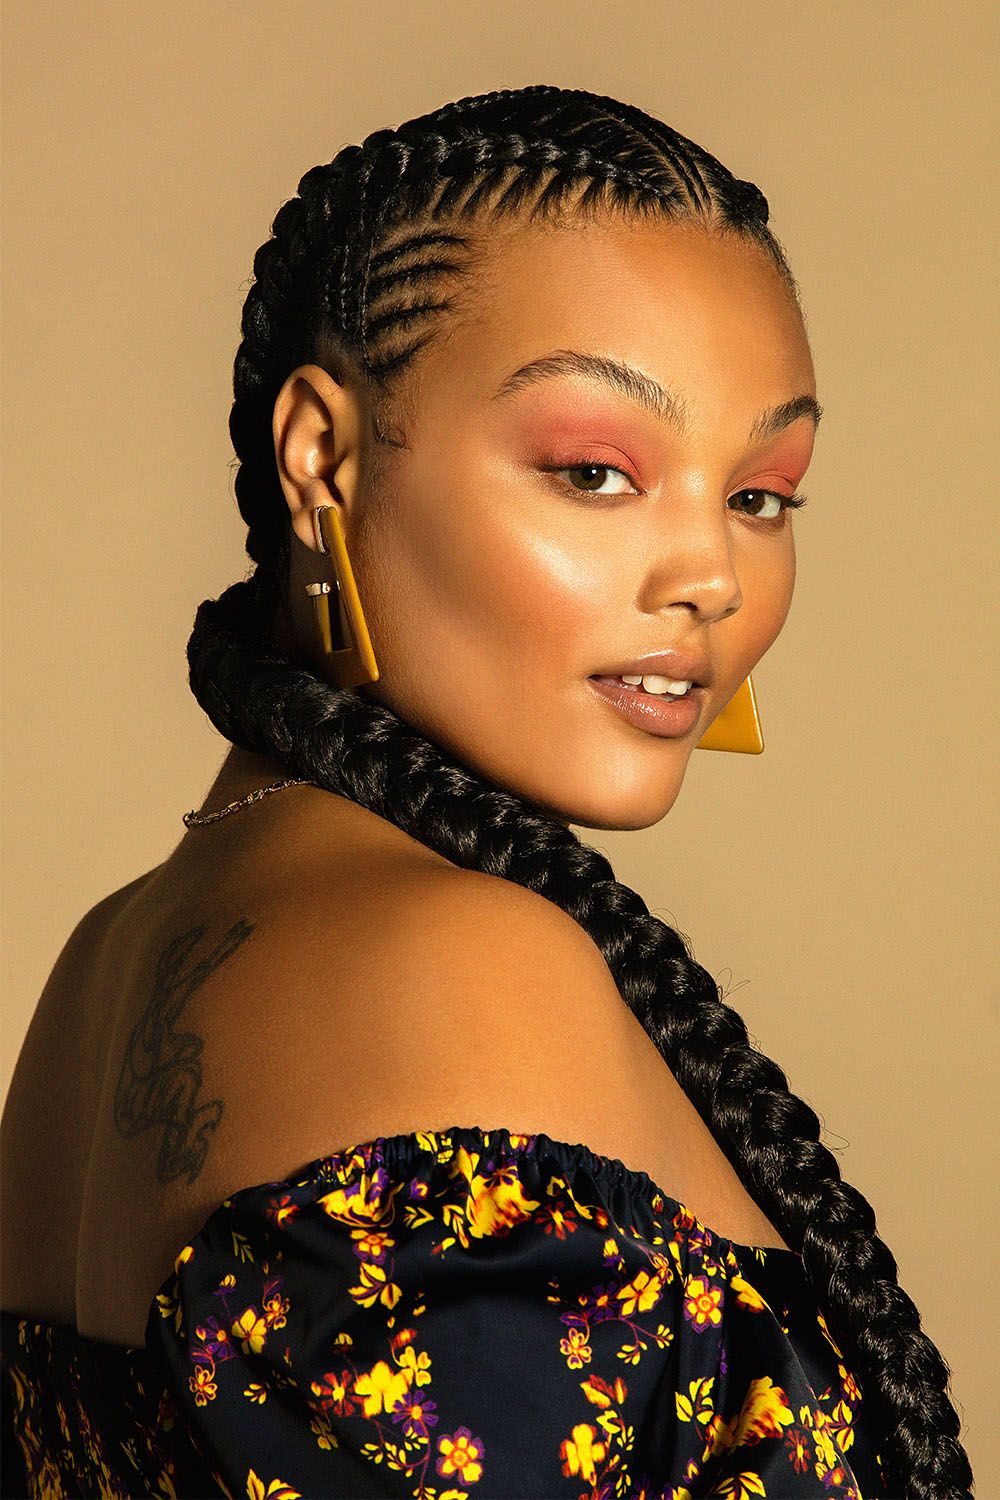 What are the best box braids hairstyles? - Quora